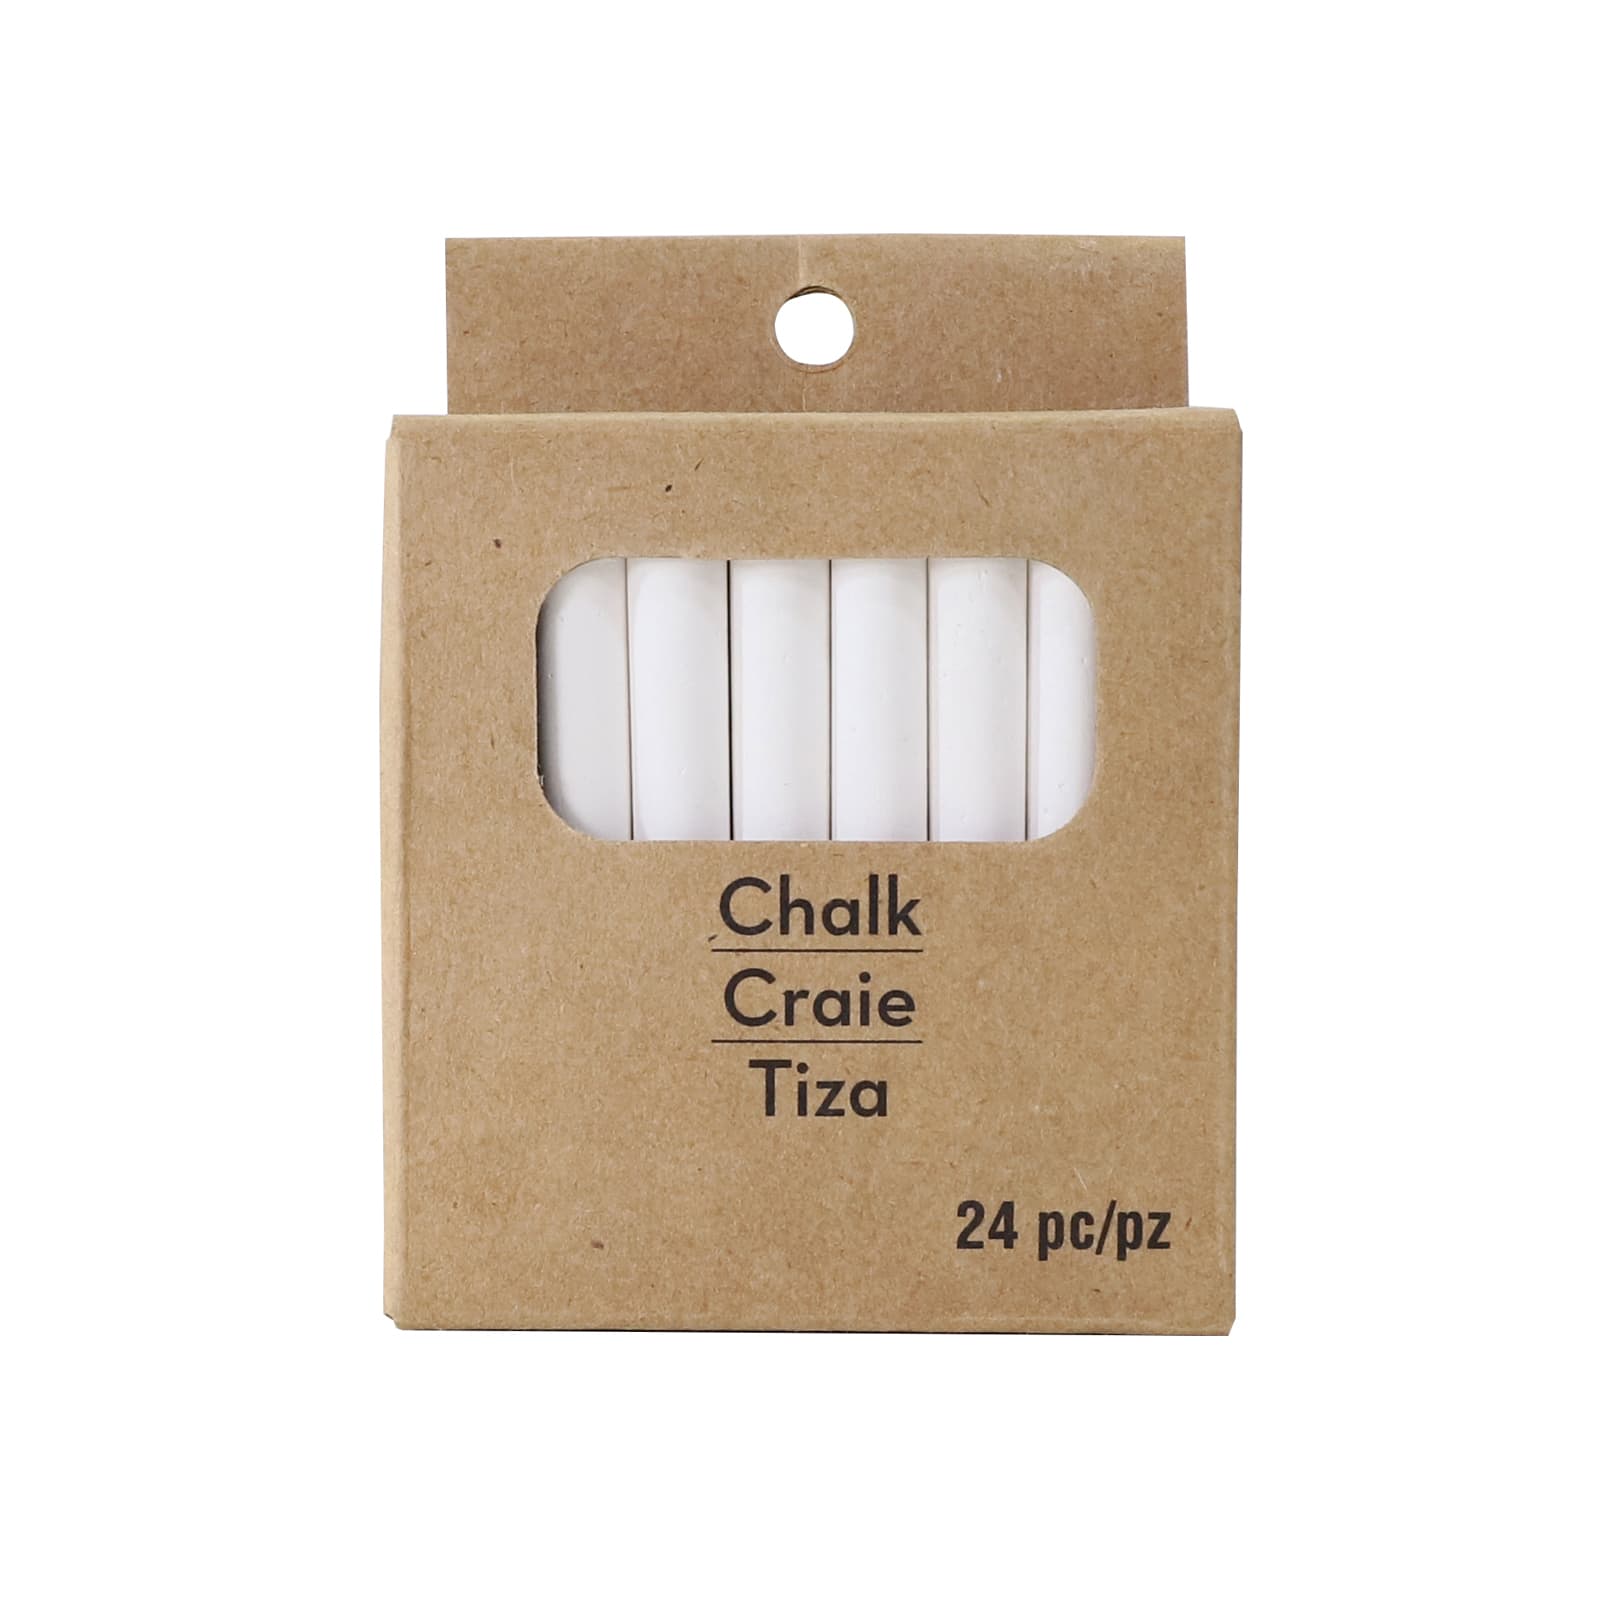 48 Packs: 24 ct. (1,152 total) Assorted Chalk Box